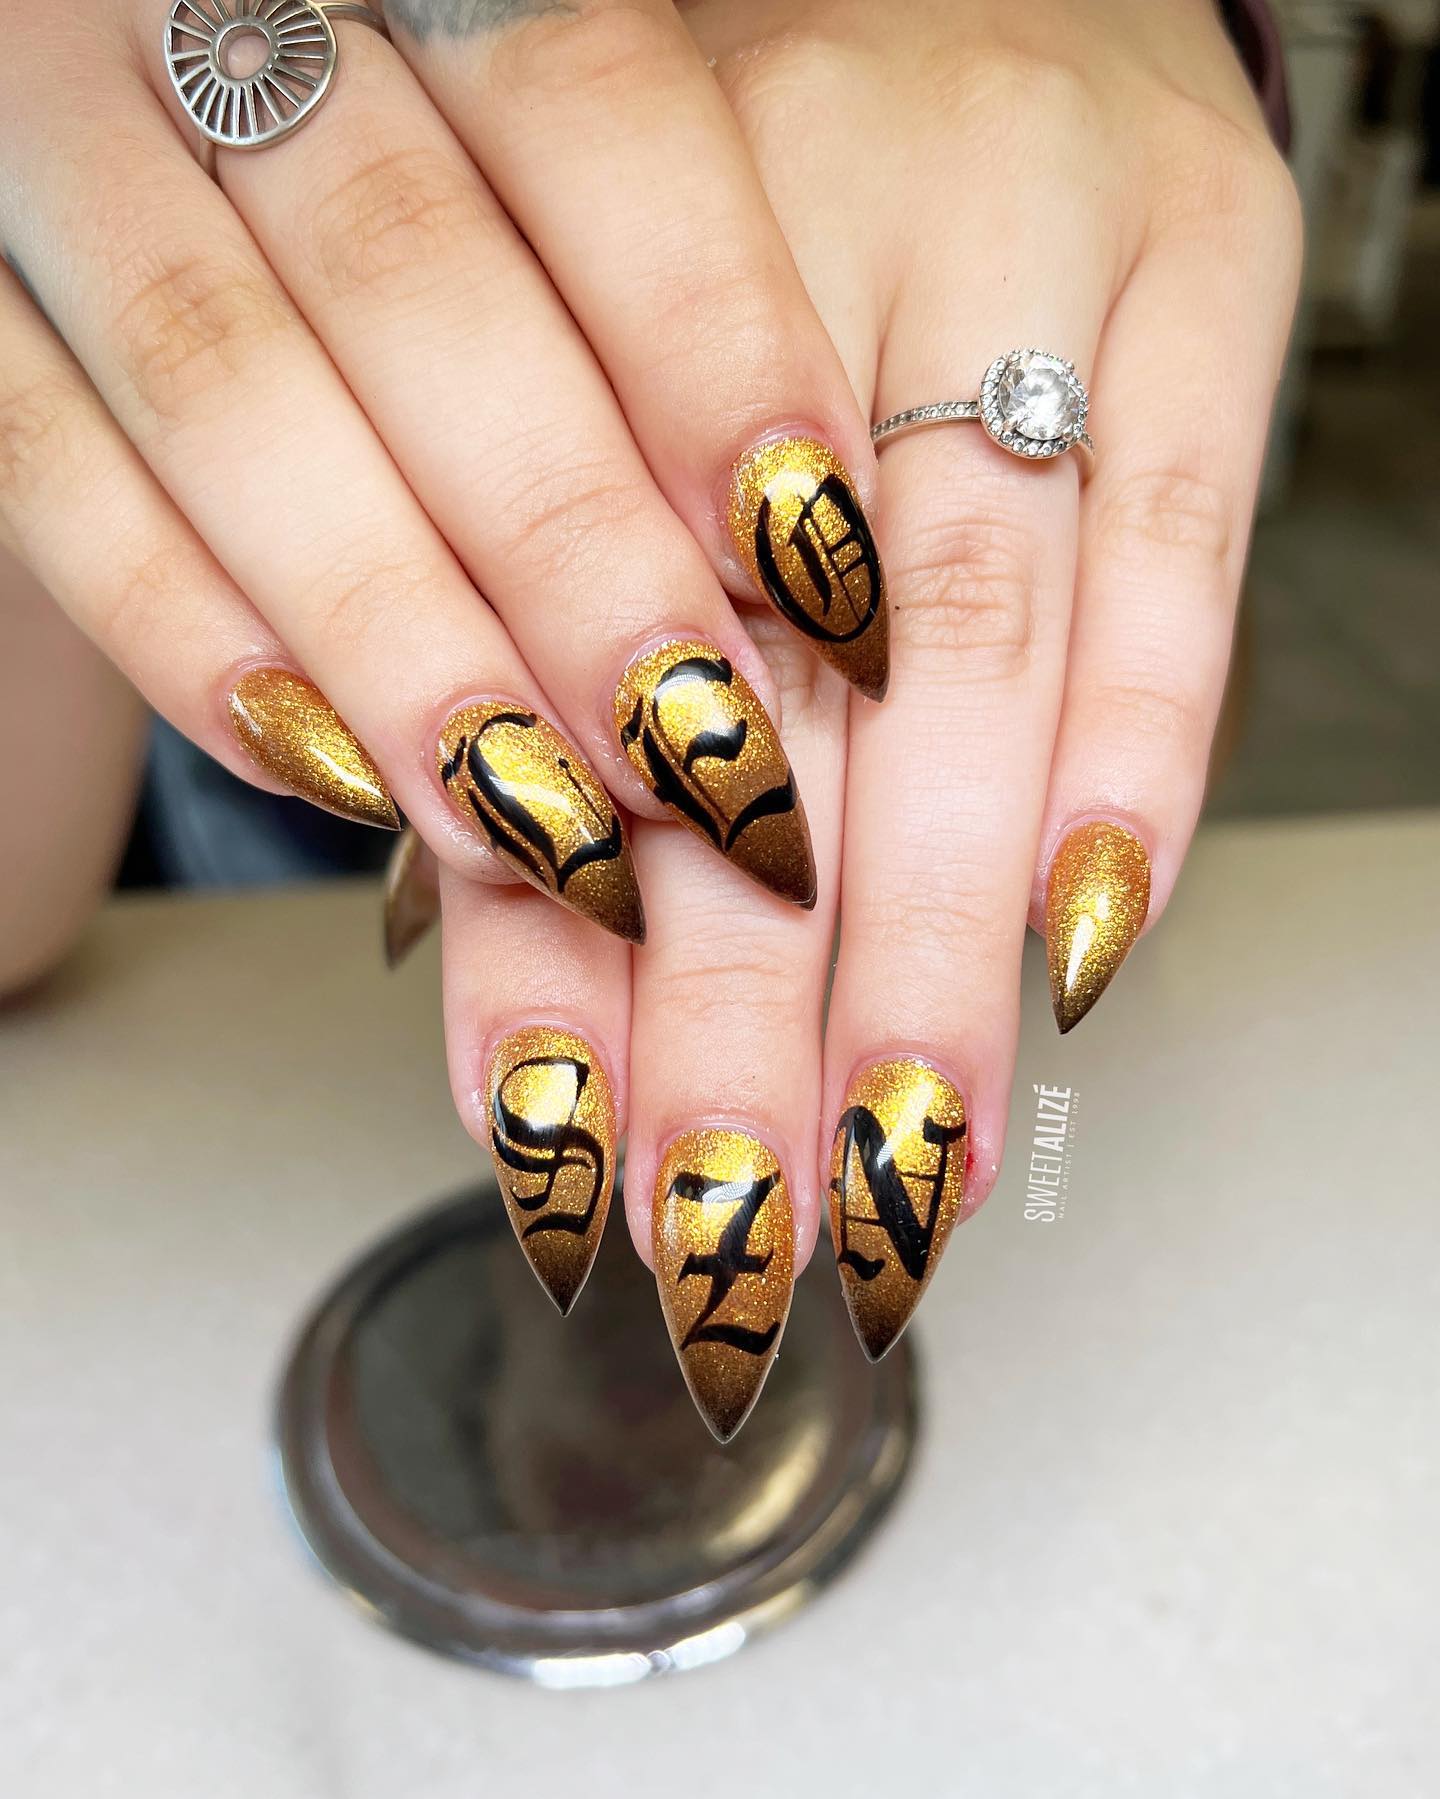  Shiny gold nail polish with all the letter nail art on it looks so rich, doesn't it? It gives the vibe that the person has a great taste.